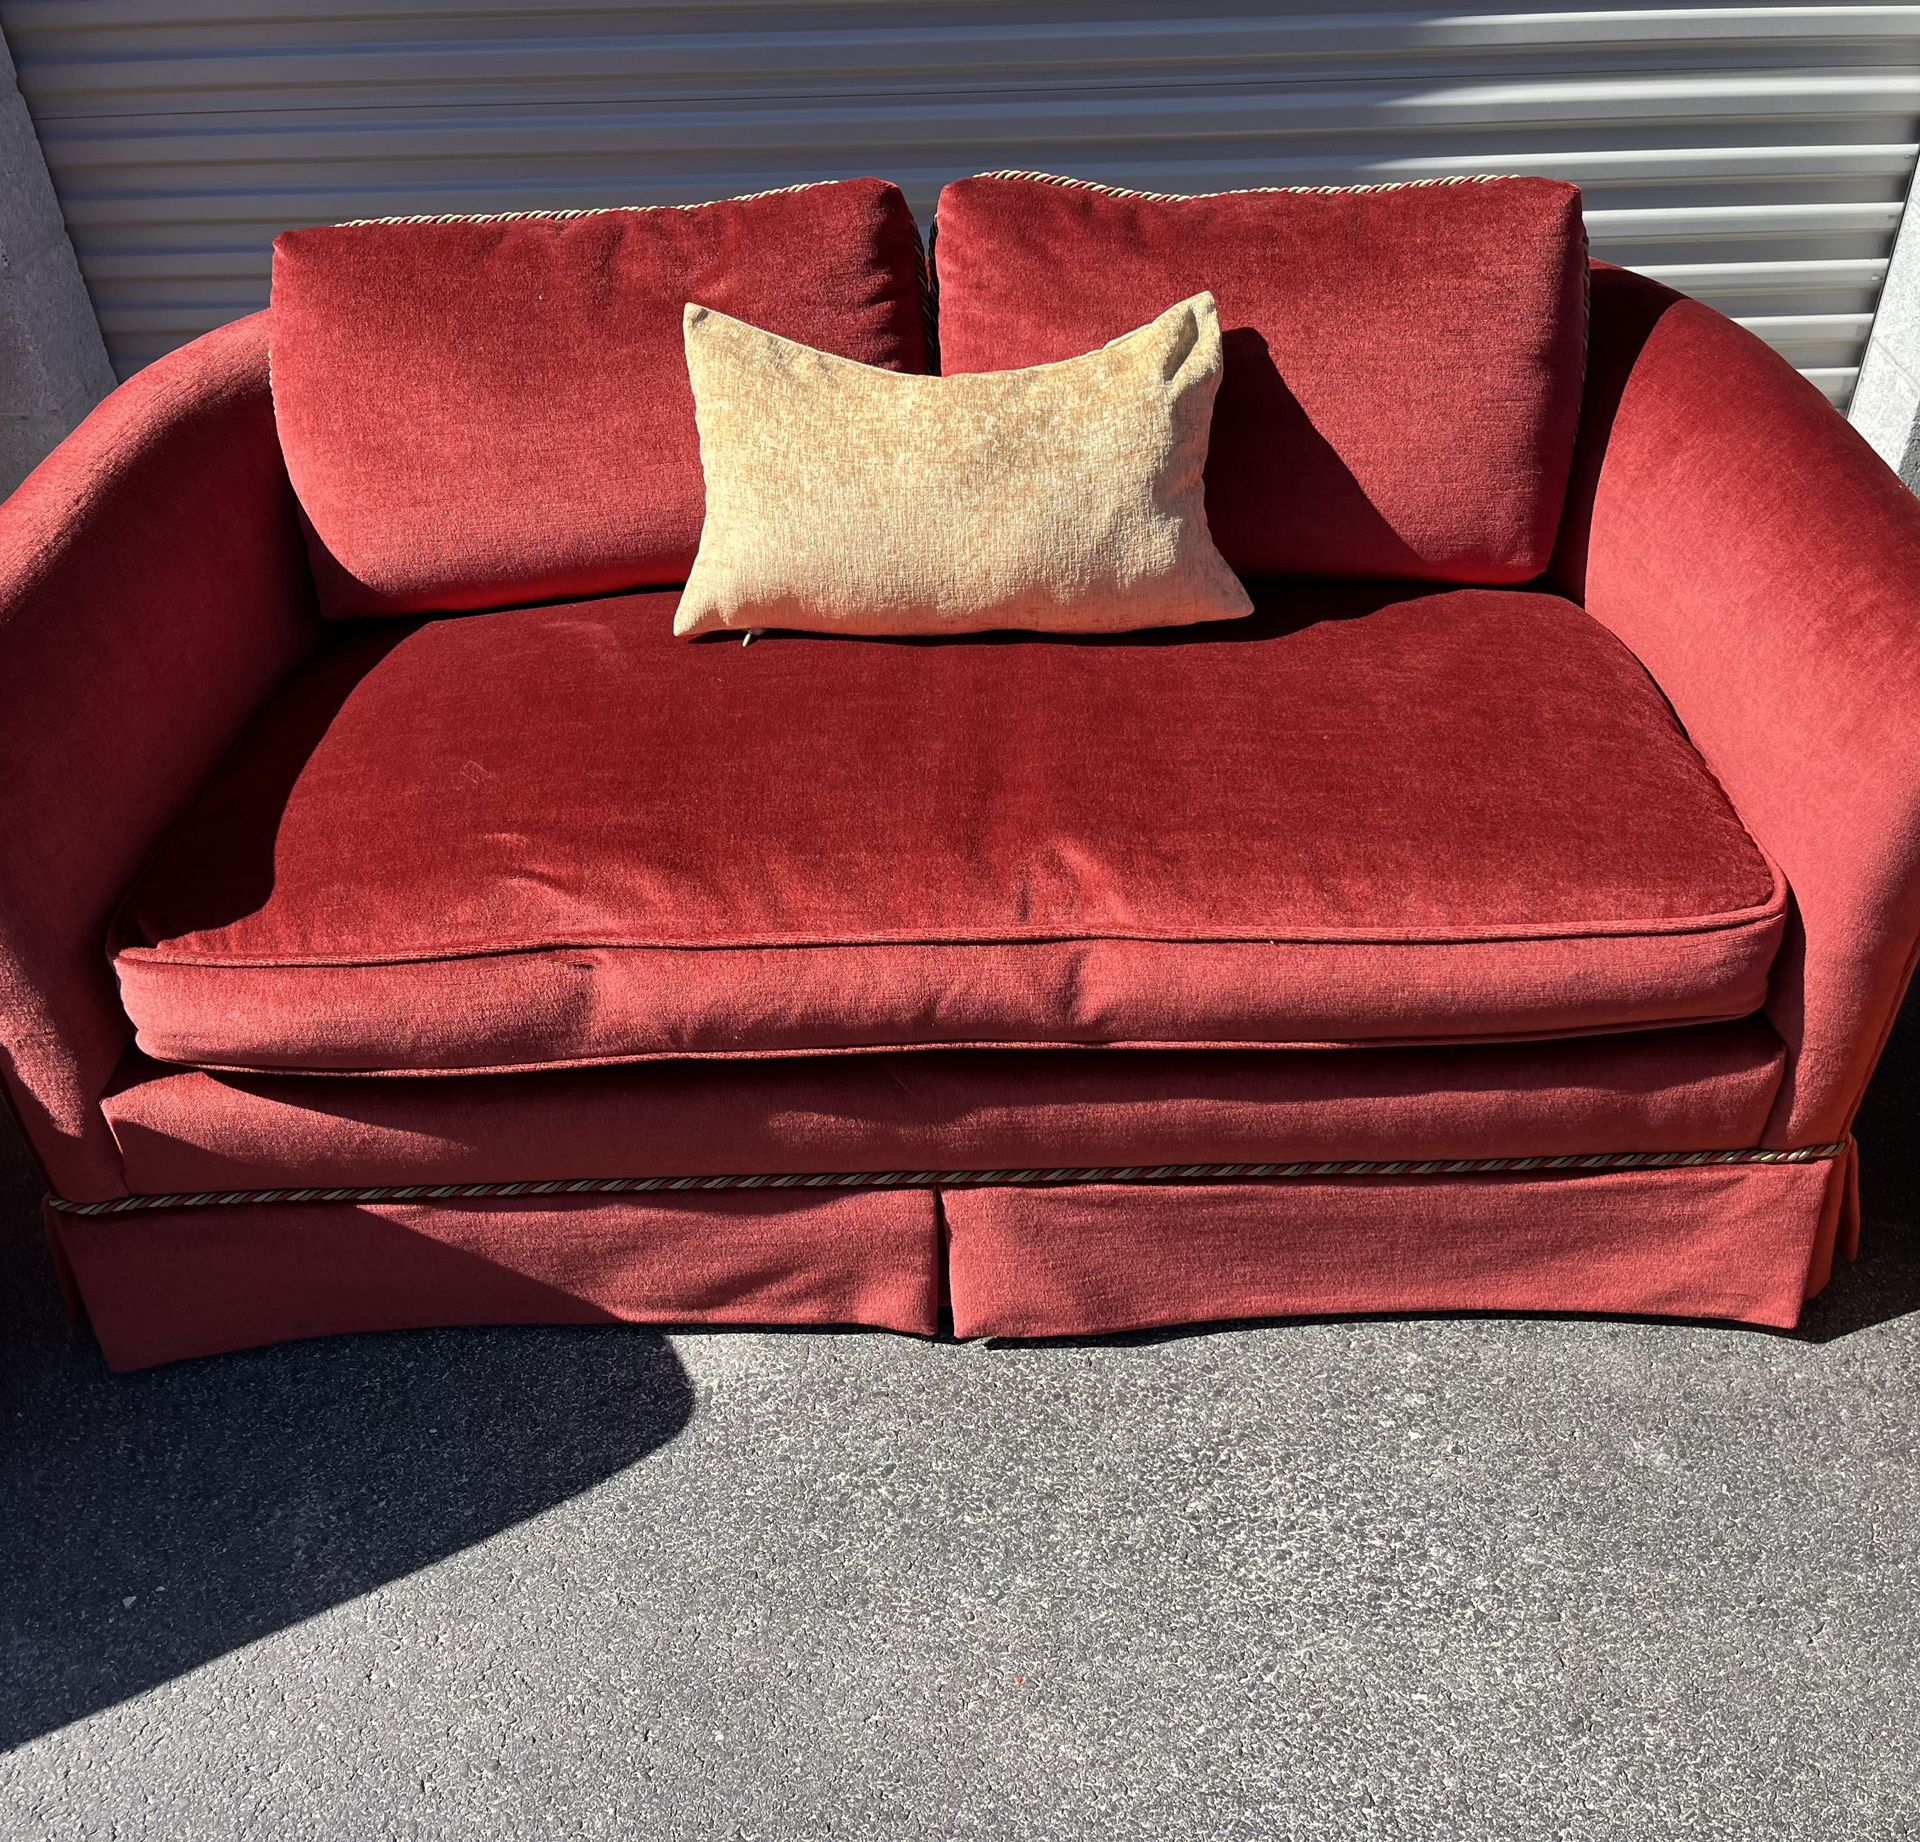 😍ELEGANT NICE WINE RED LOVESEAT⭐️DELIVERY AVAILABLE 🚚